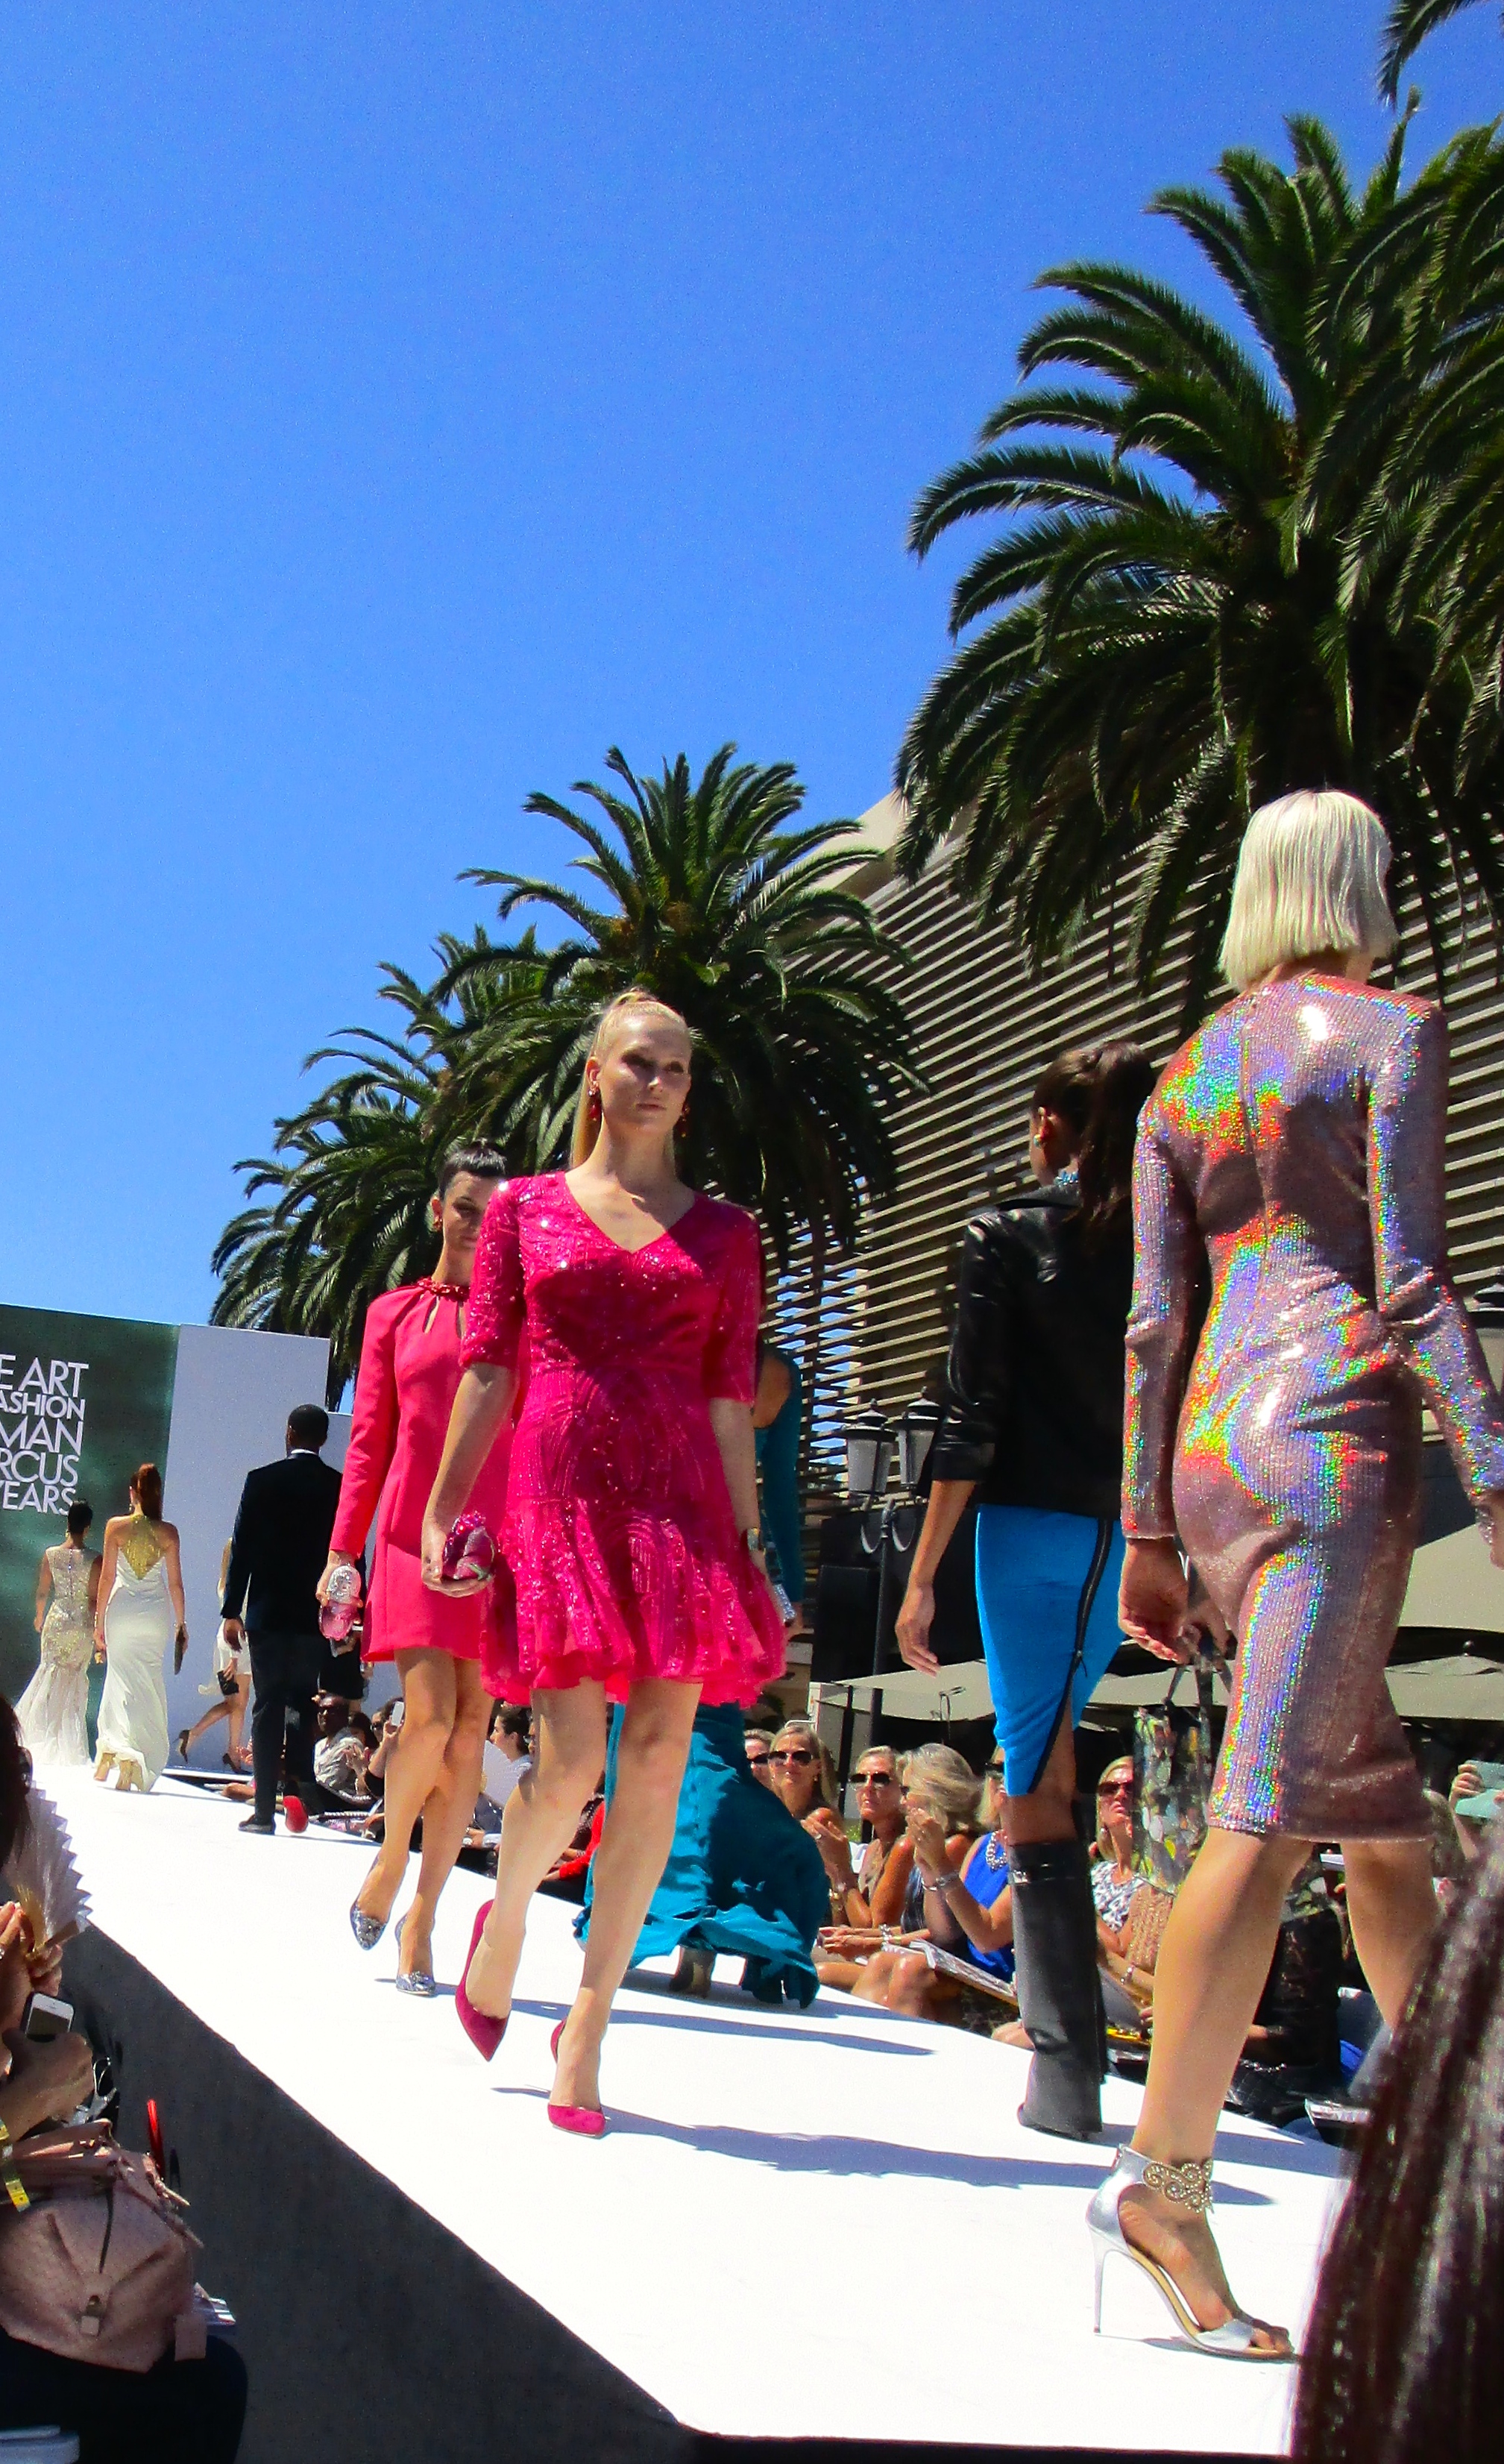 Go see some fashion at OC Style Week – My Life in Shoes